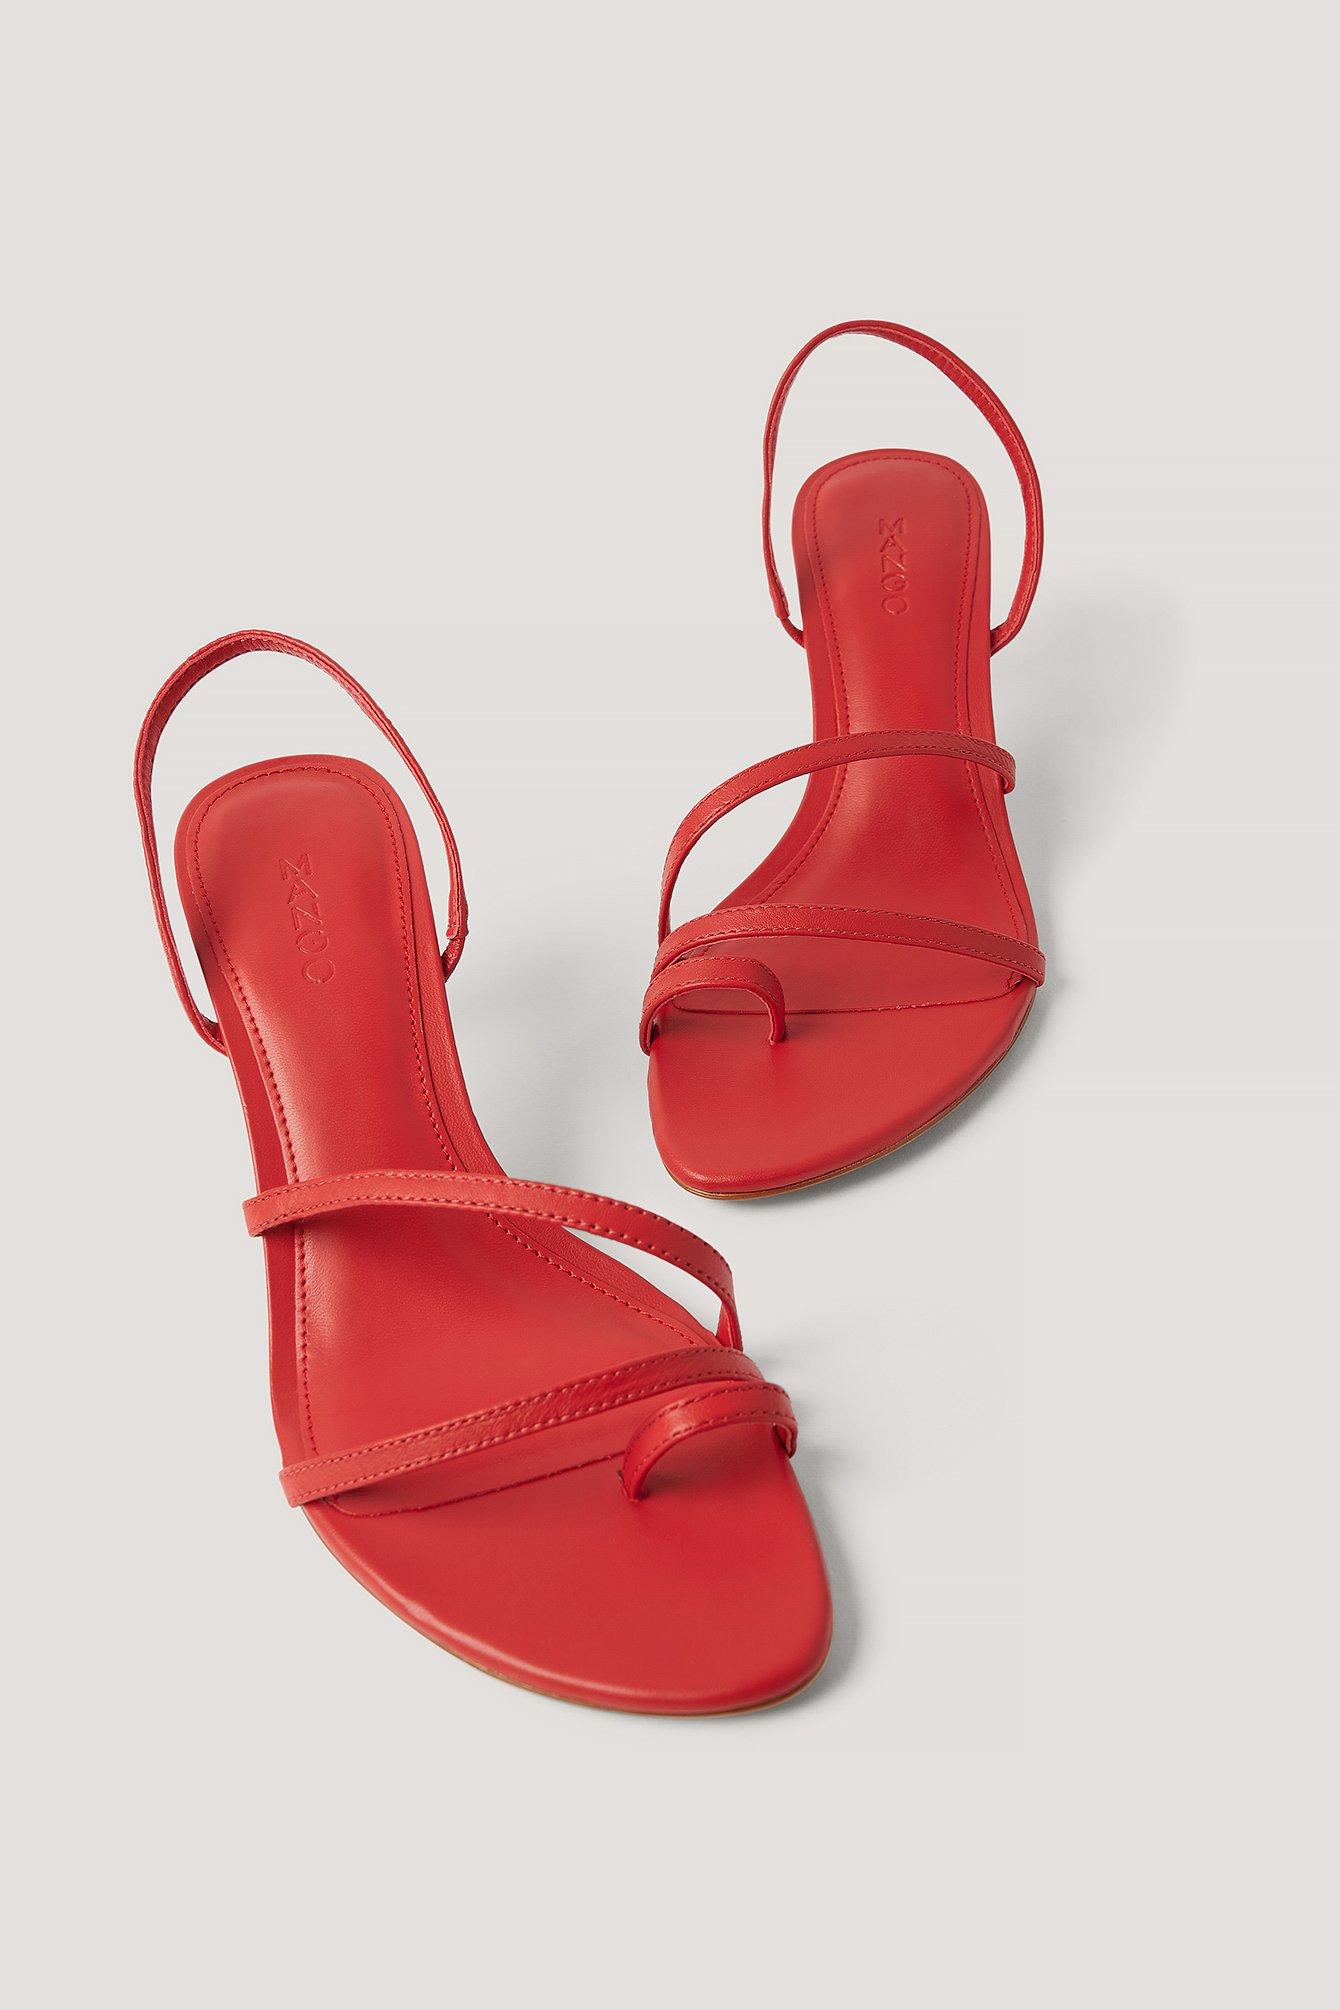 Mango Leather Red Loma Sandals | Lyst